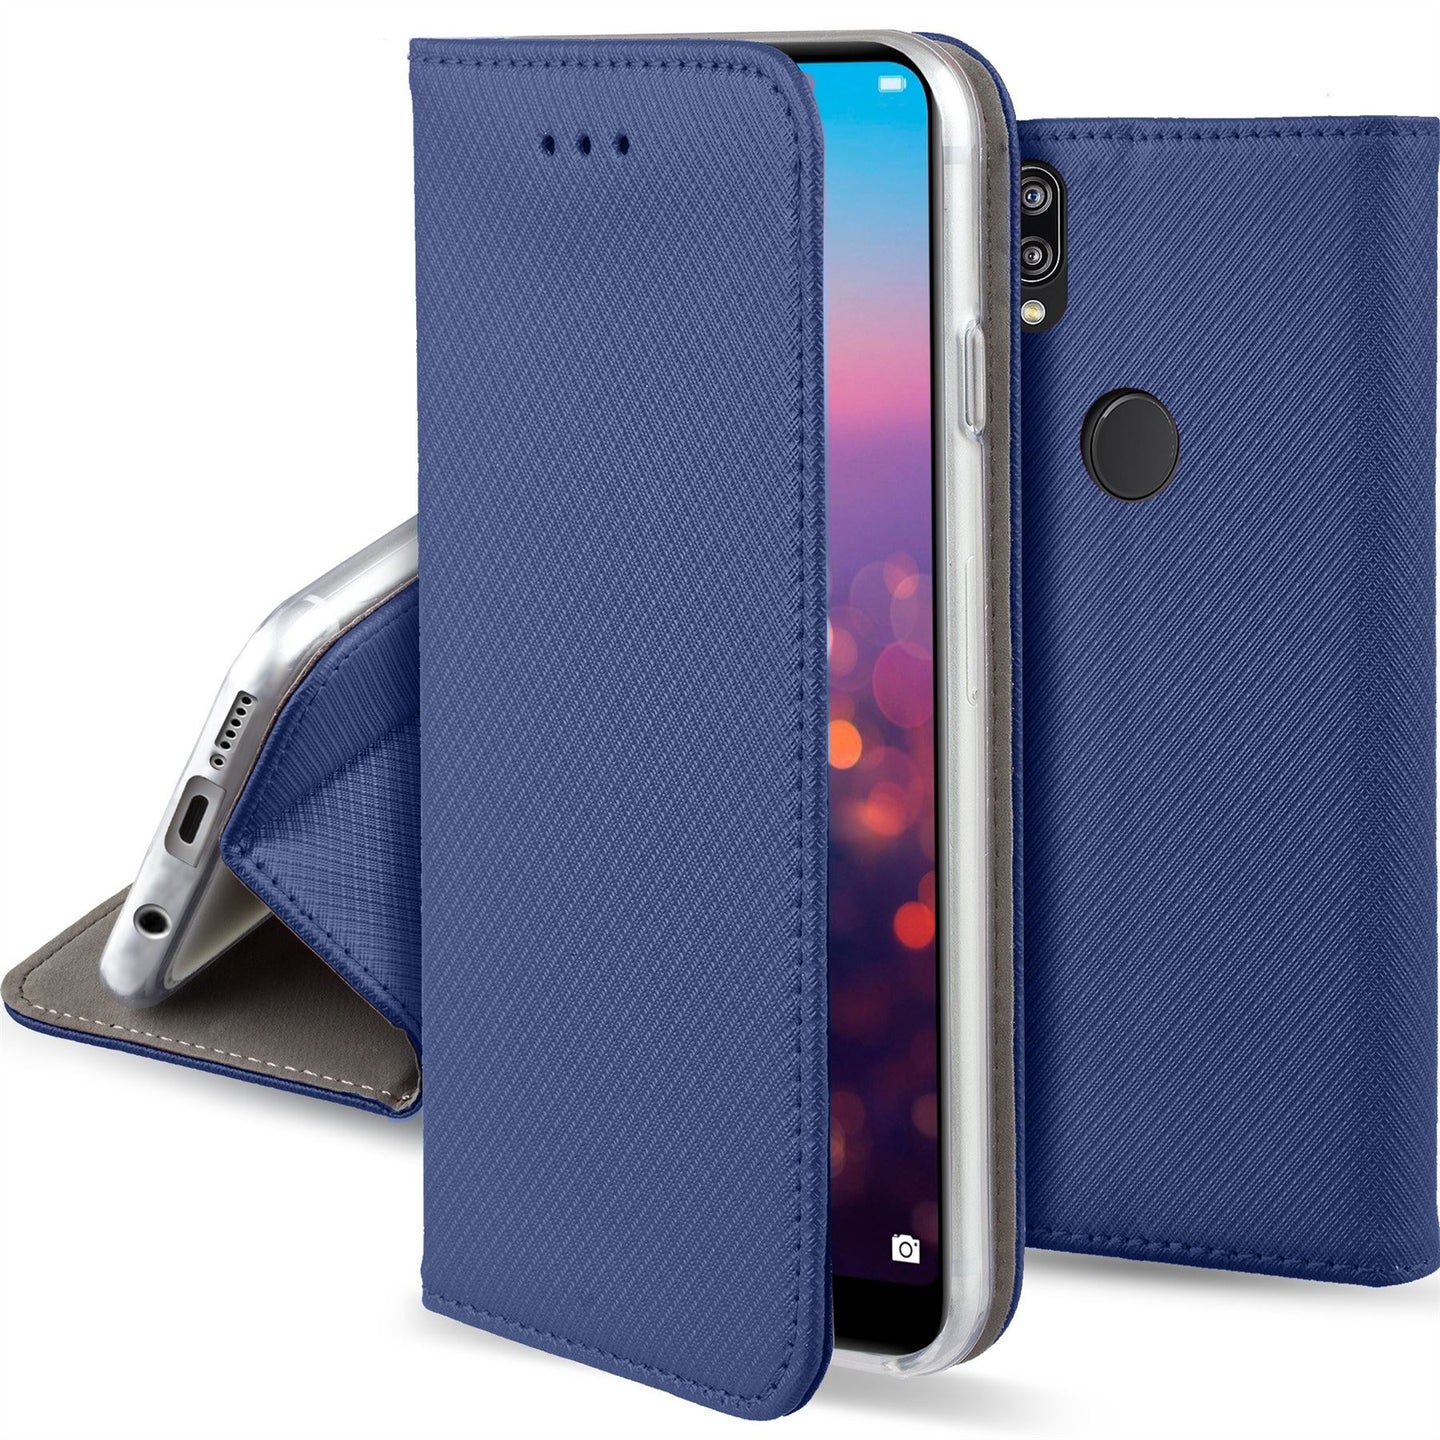 Moozy Case Flip Cover for Huawei P20 Lite, Dark Blue - Smart Magnetic Flip Case with Card Holder and Stand